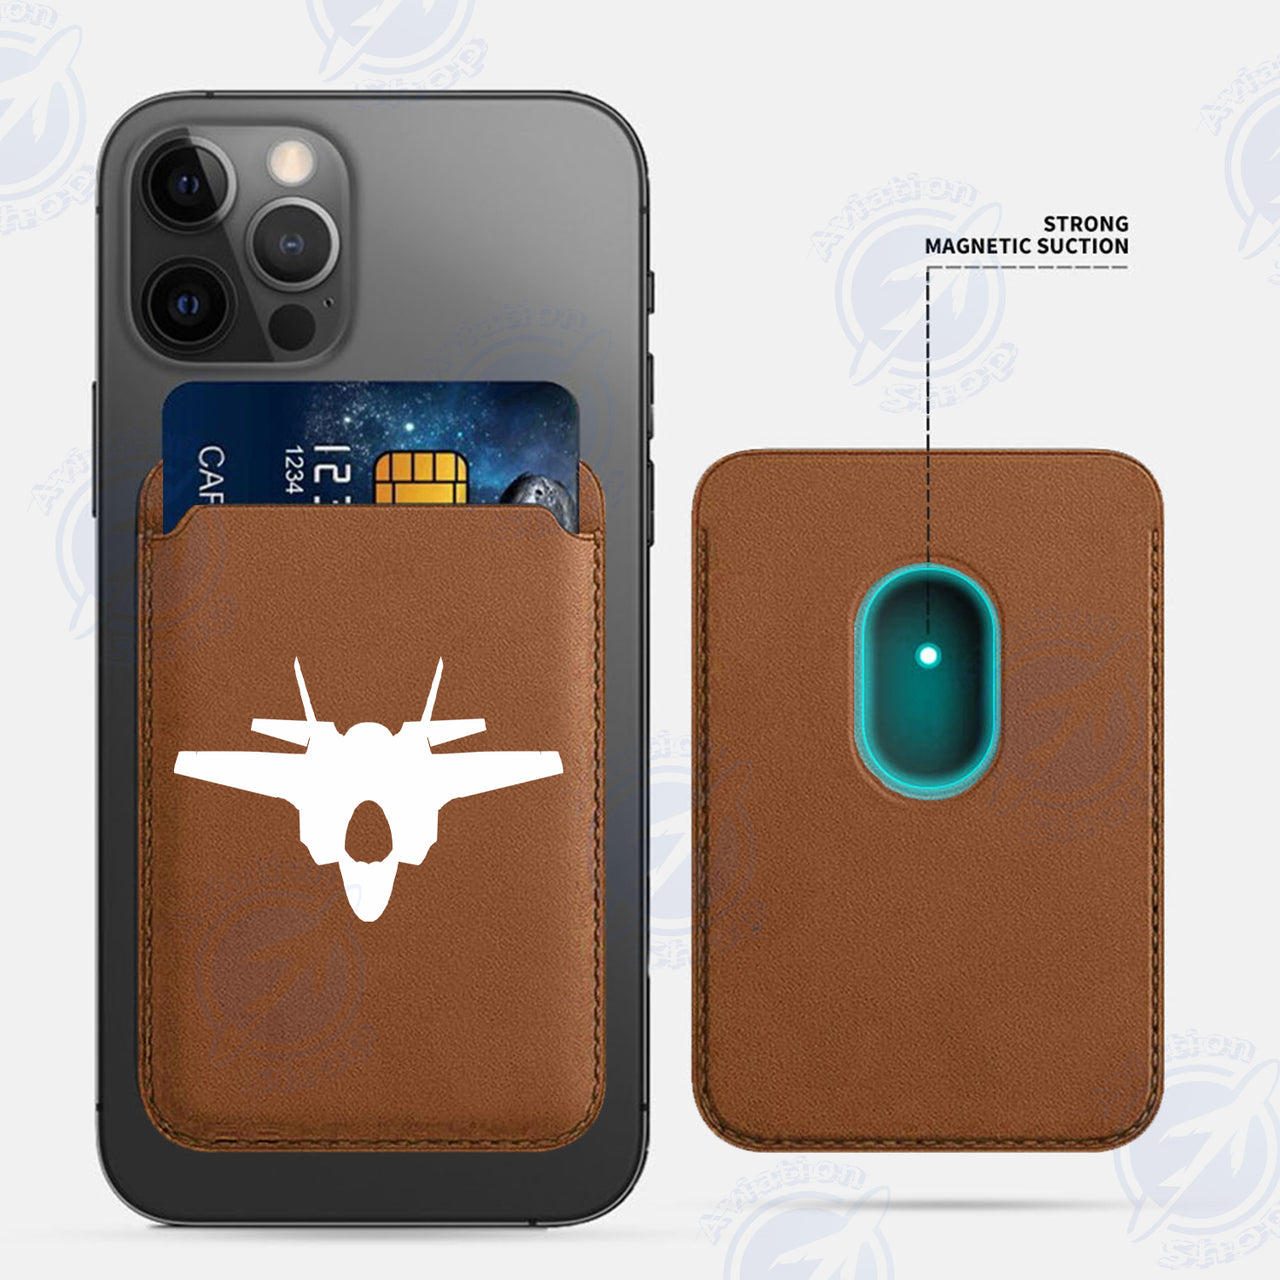 Lockheed Martin F-35 Lightning II Silhouette iPhone Cases Magnetic Card Wallet